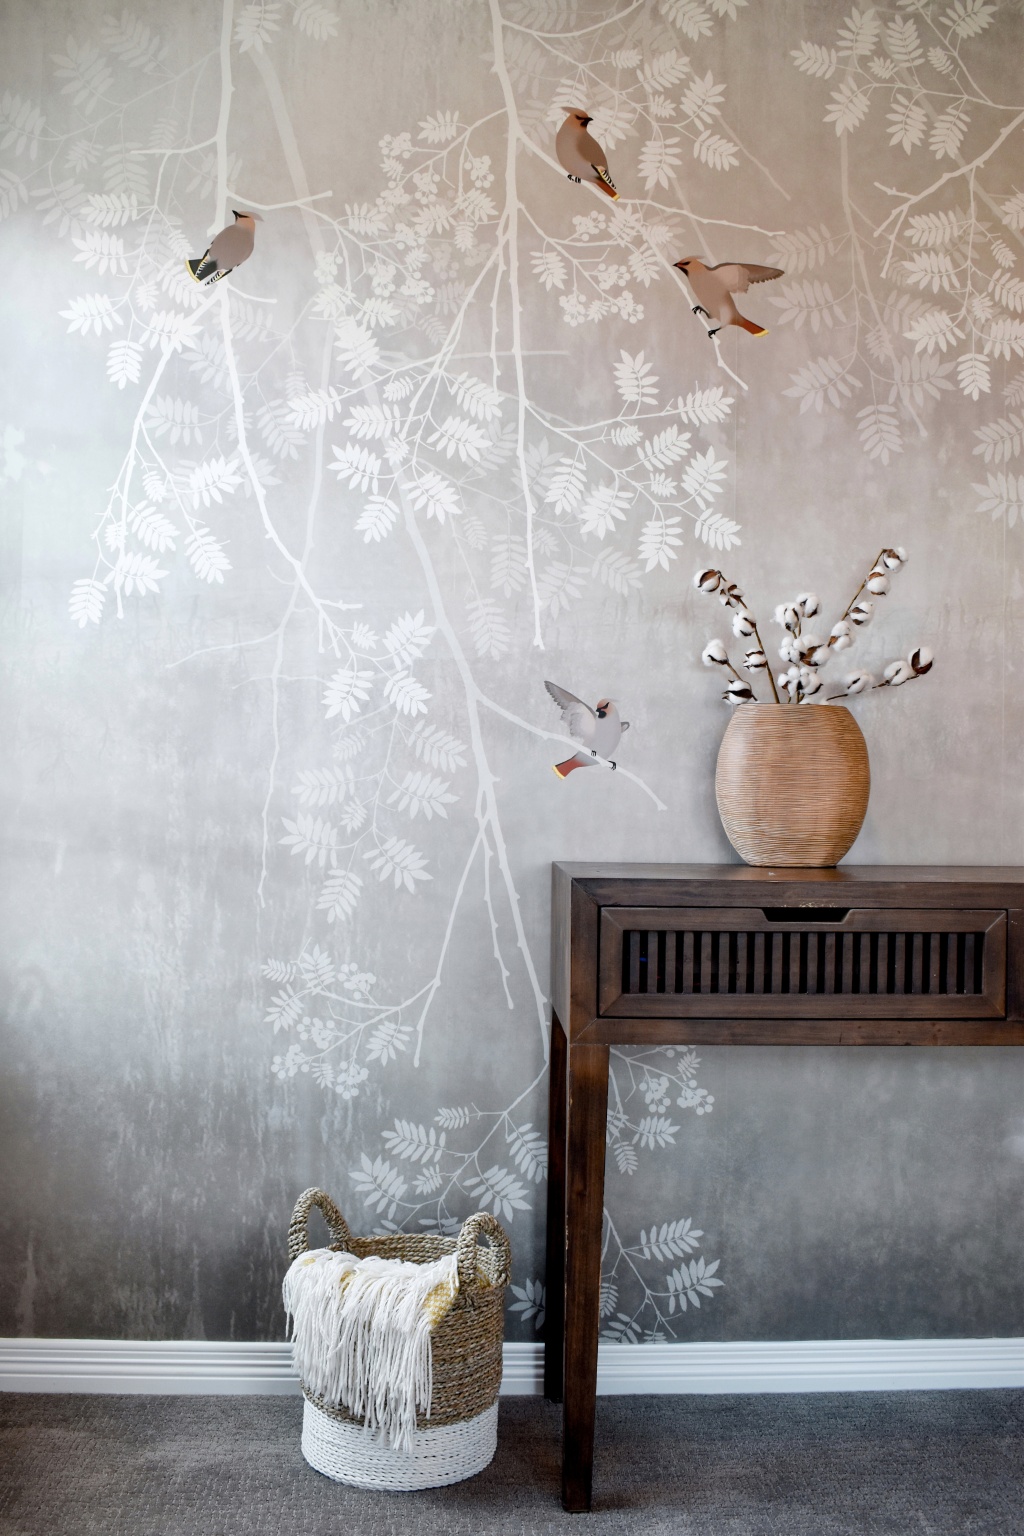 MAKE YOUR HOME COZY AND BEAUTIFUL WITH PHOTOWALL WALLPAPER!